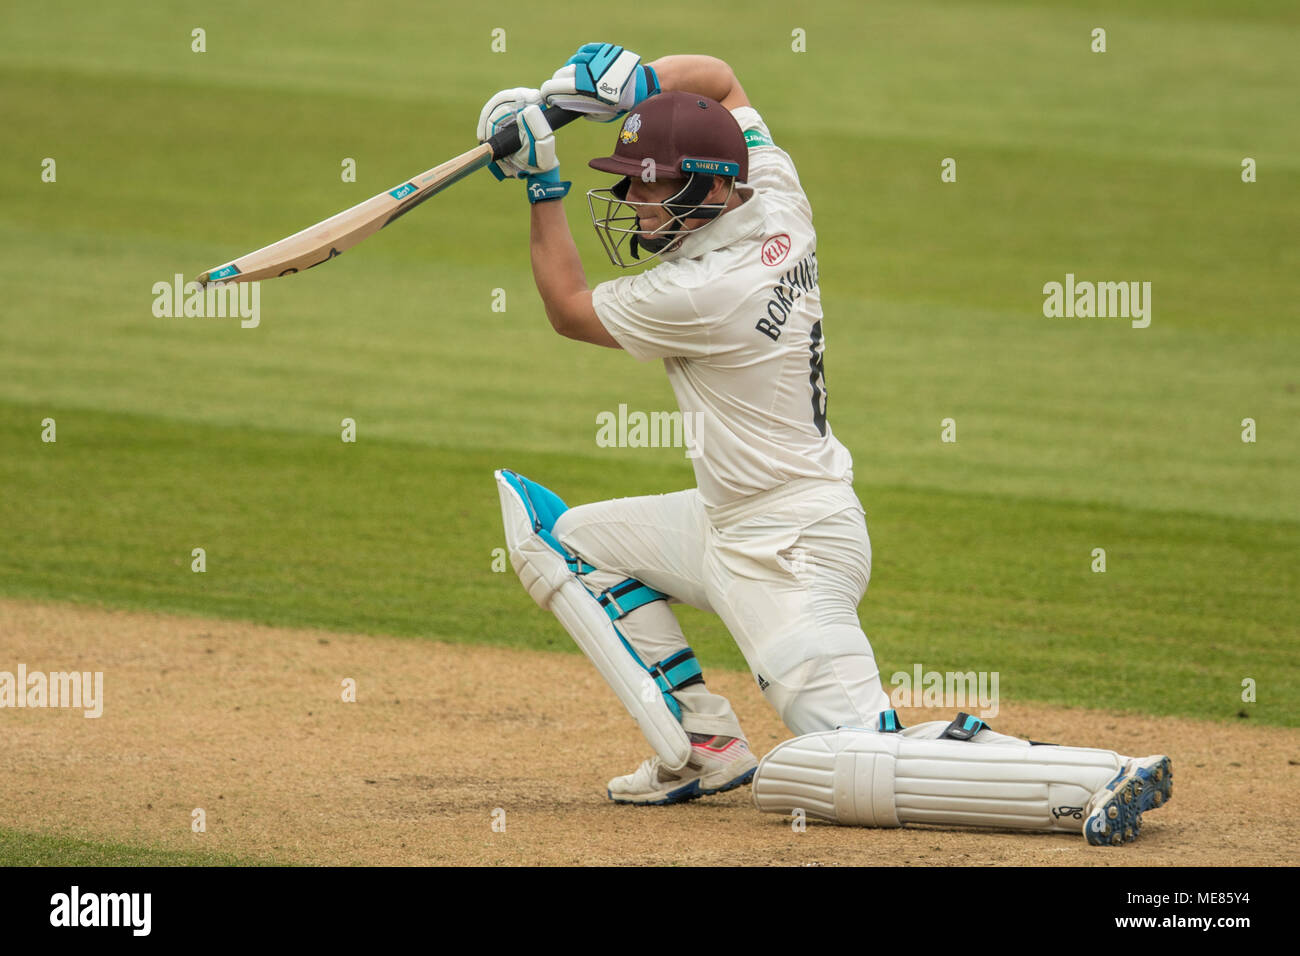 London,UK. 21 April 2018. Scott Borthwick batting for Surrey against Hampshire on day two of the Specsavers County Championship game at the Oval. David Rowe/Alamy Live News Stock Photo